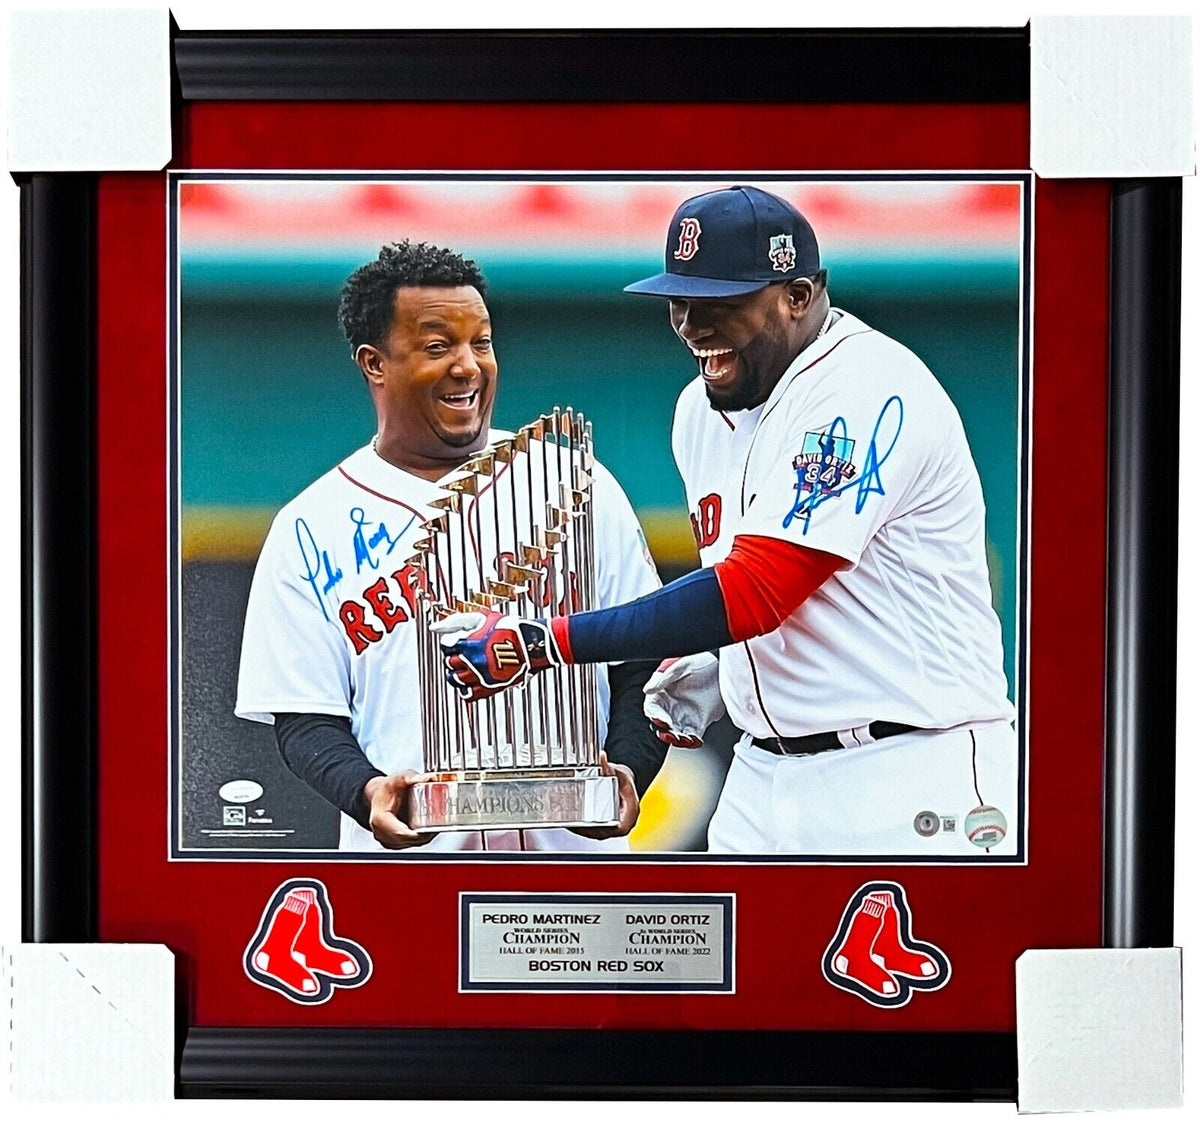 Pedro Martinez Boston Red Sox Fanatics Authentic Autographed 16 x 20  Pitching in White Jersey Photograph